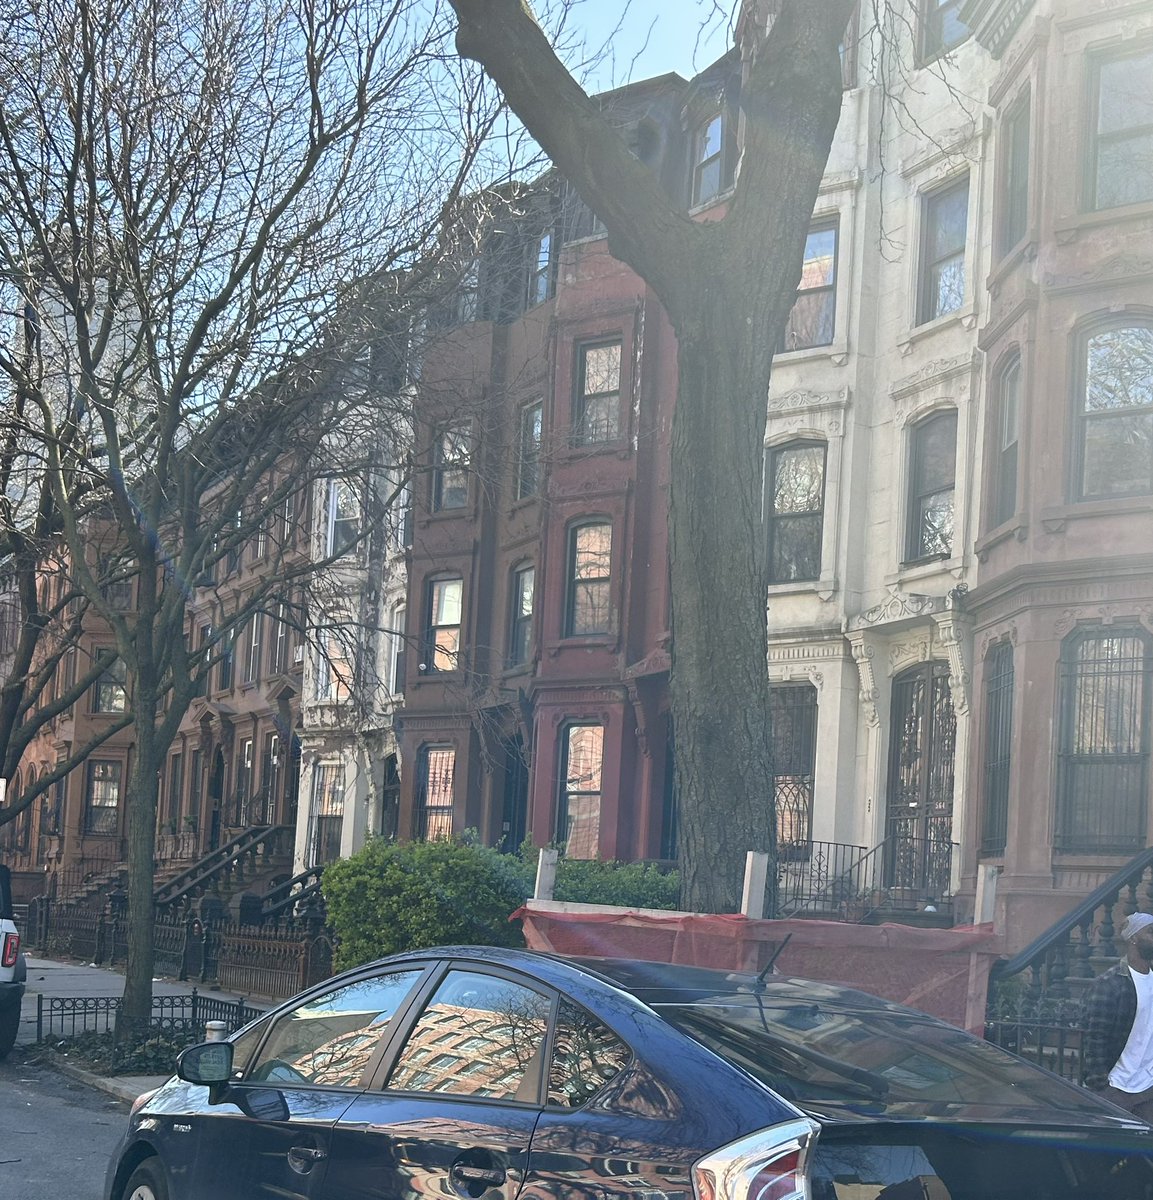 Love the Historic Brooklyn Brownstones . Shout out to Brooklyn today! #HappySunday #PalmSunday2023 #architecturaldesign #architecture #NYC #NewYorkCity #Willoughby